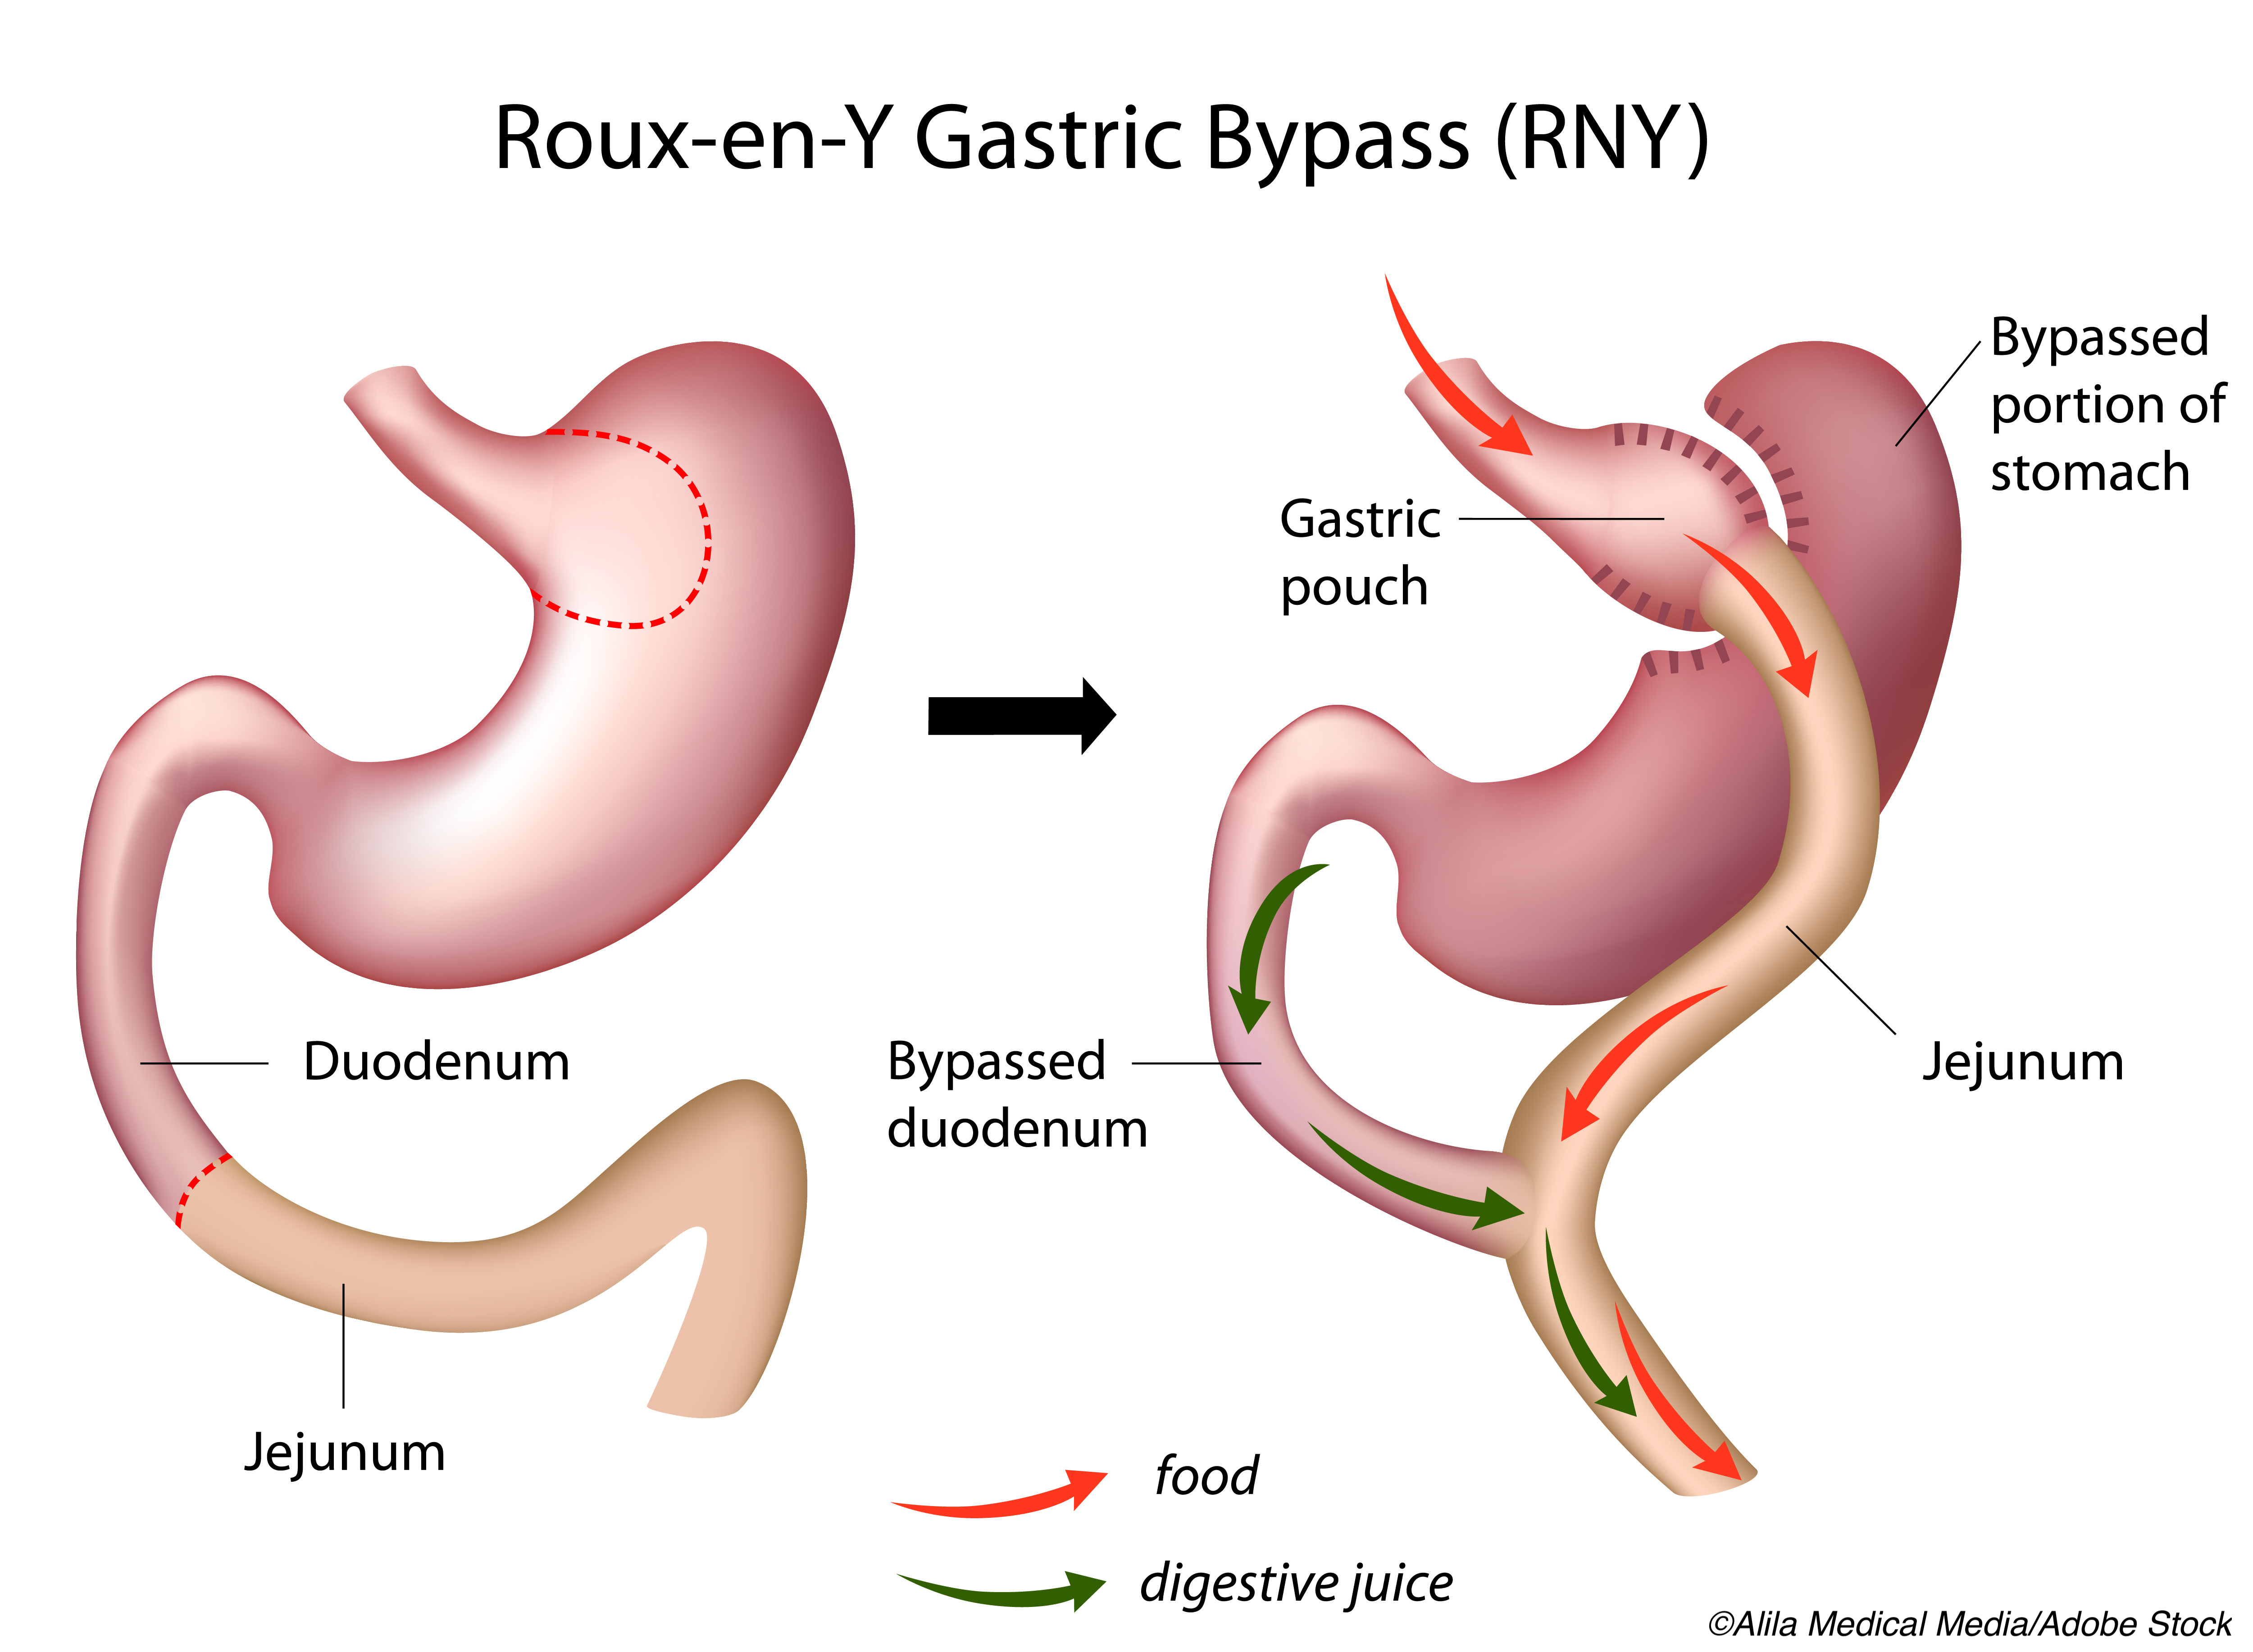 Bariatric Surgery: Analysis Suggests Gastric Bypass May Be Better Option